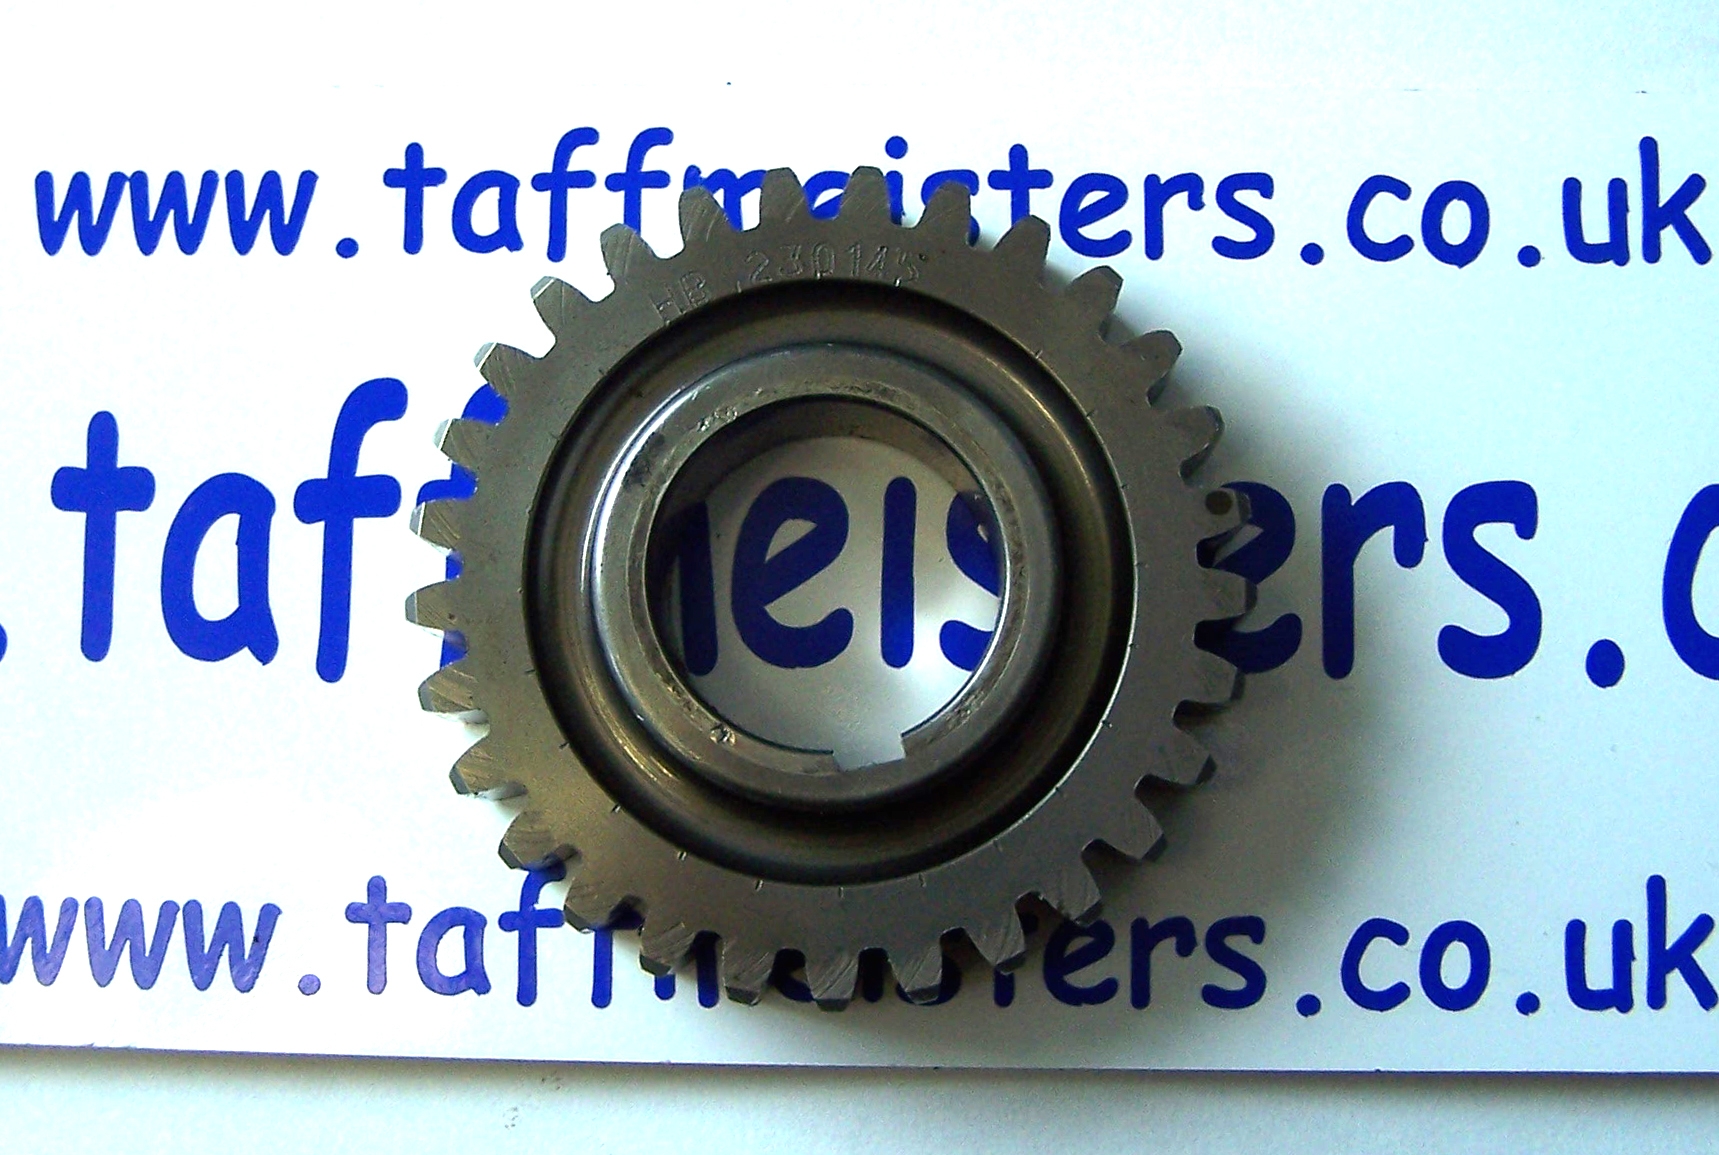 100180 - 23013001 Crank Primary Gear 2001 - early 2002